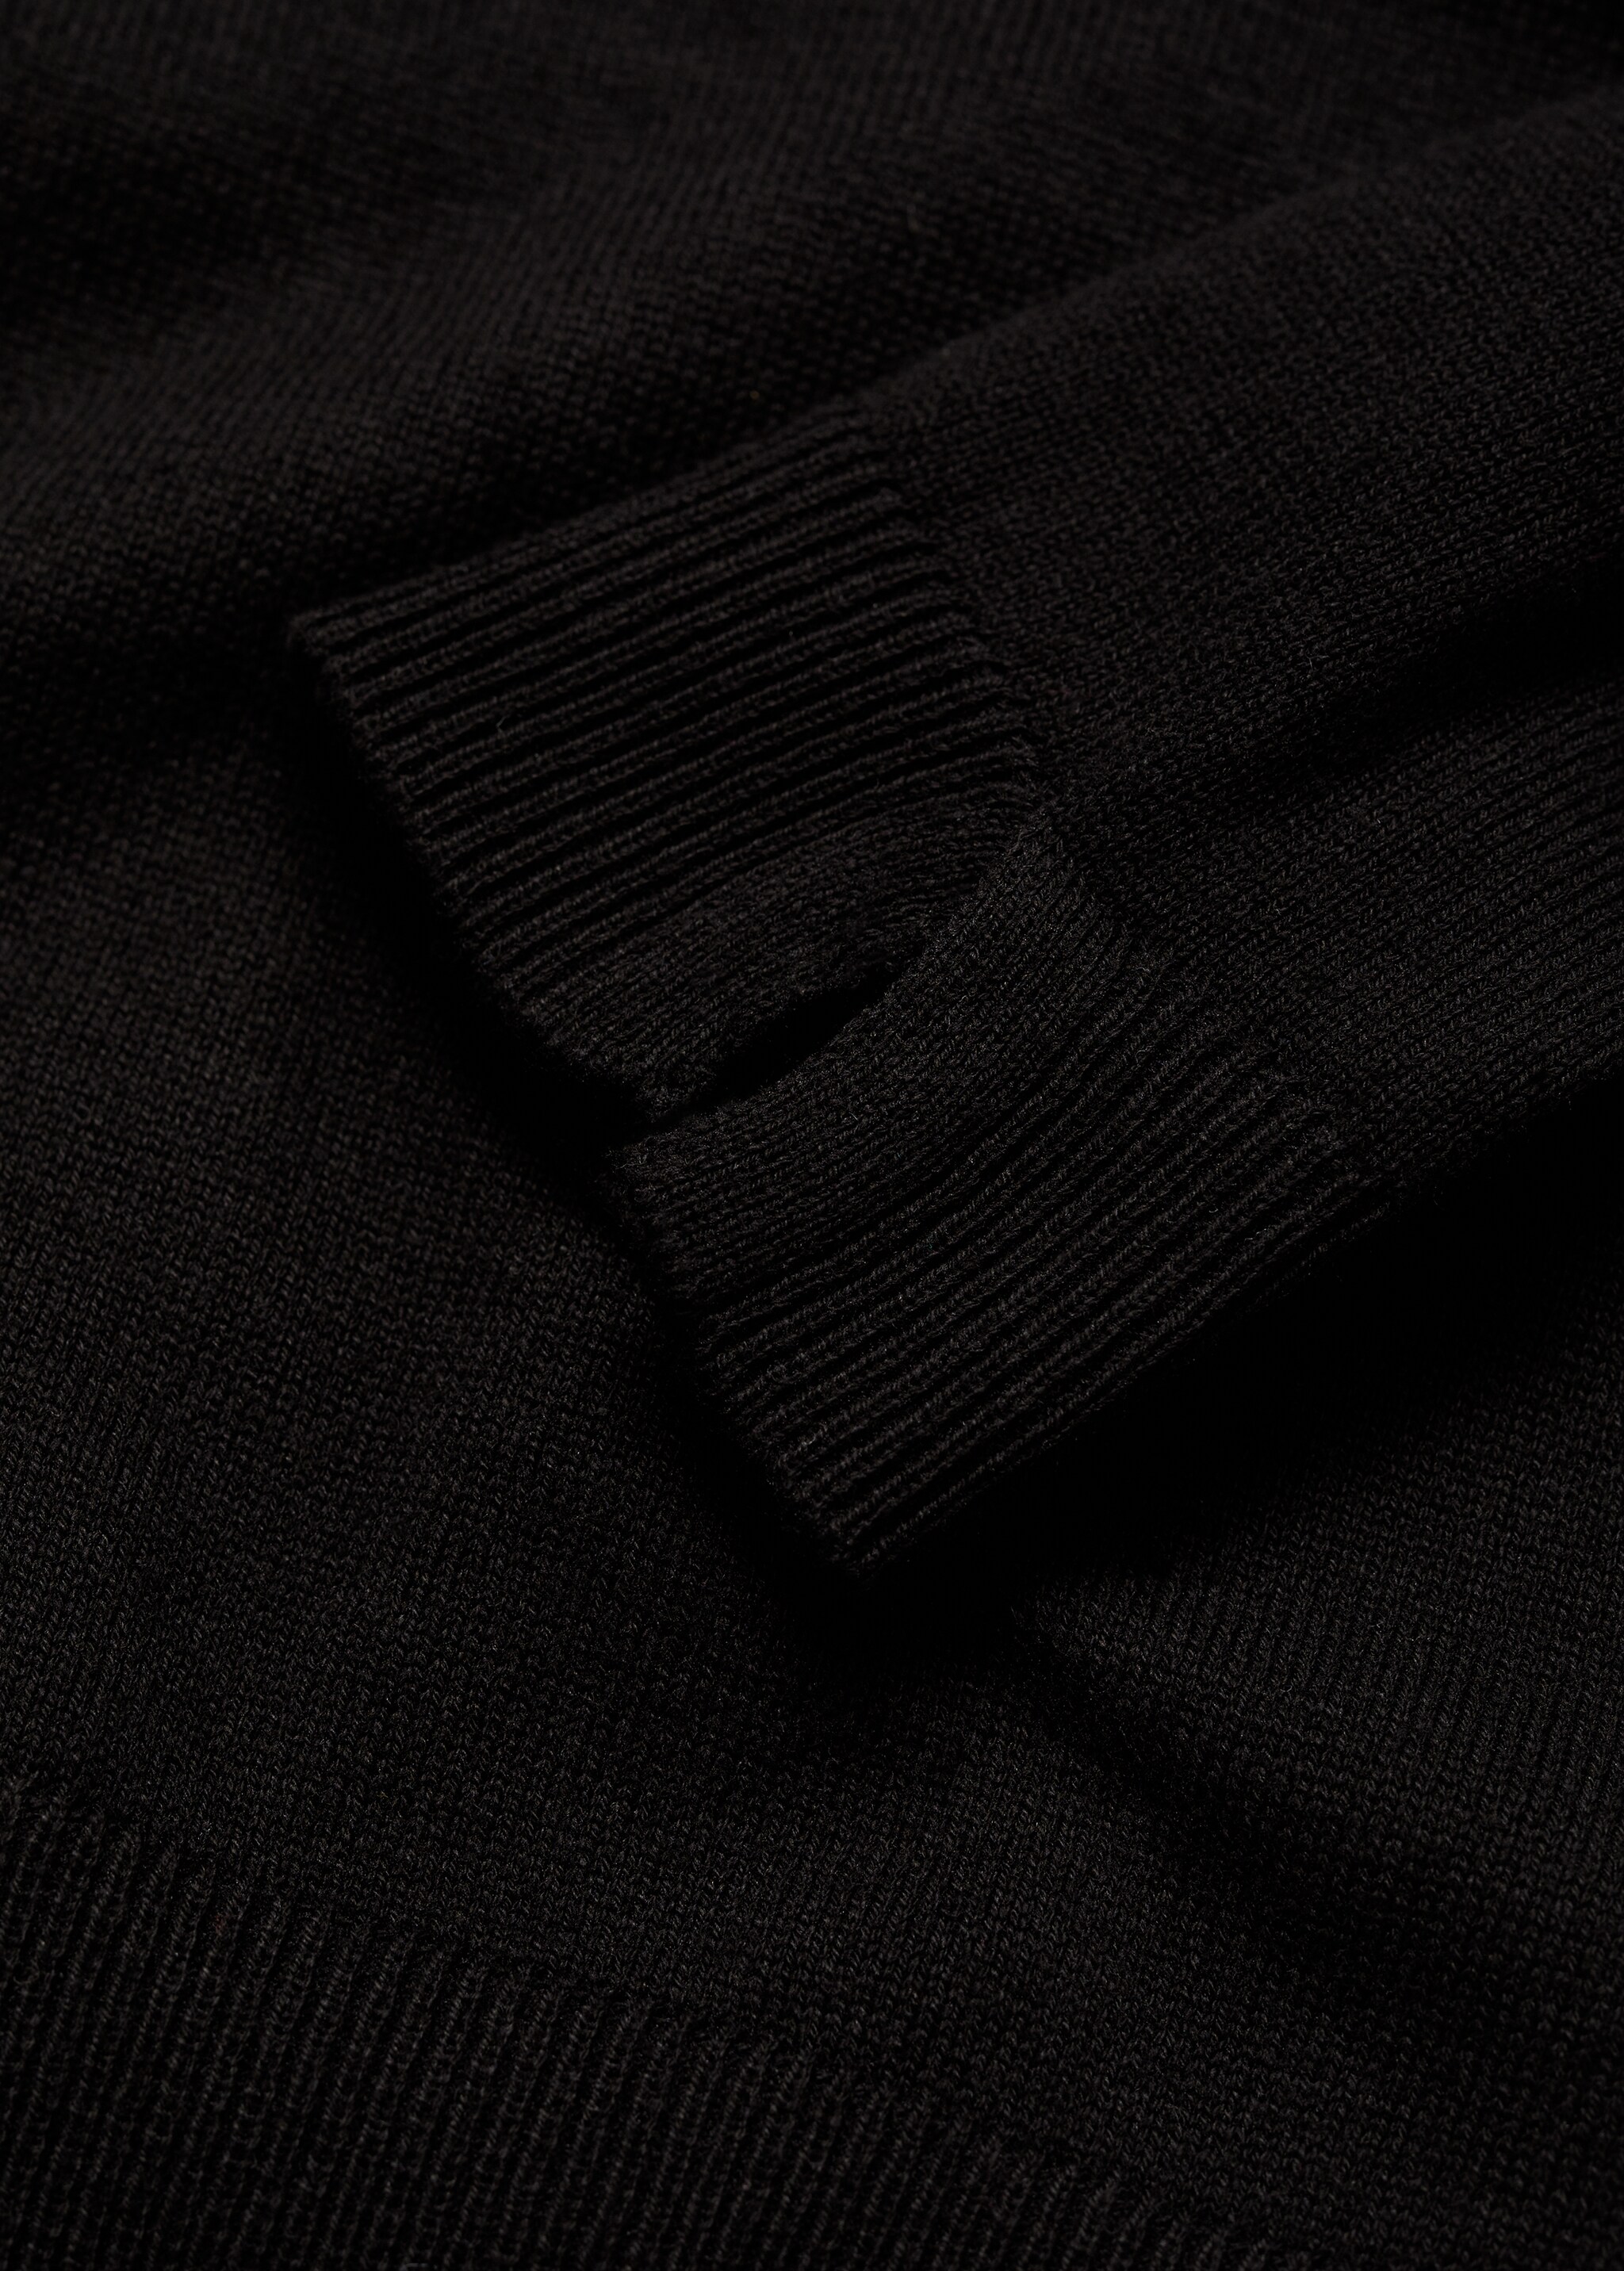 Turtleneck sweater - Details of the article 0